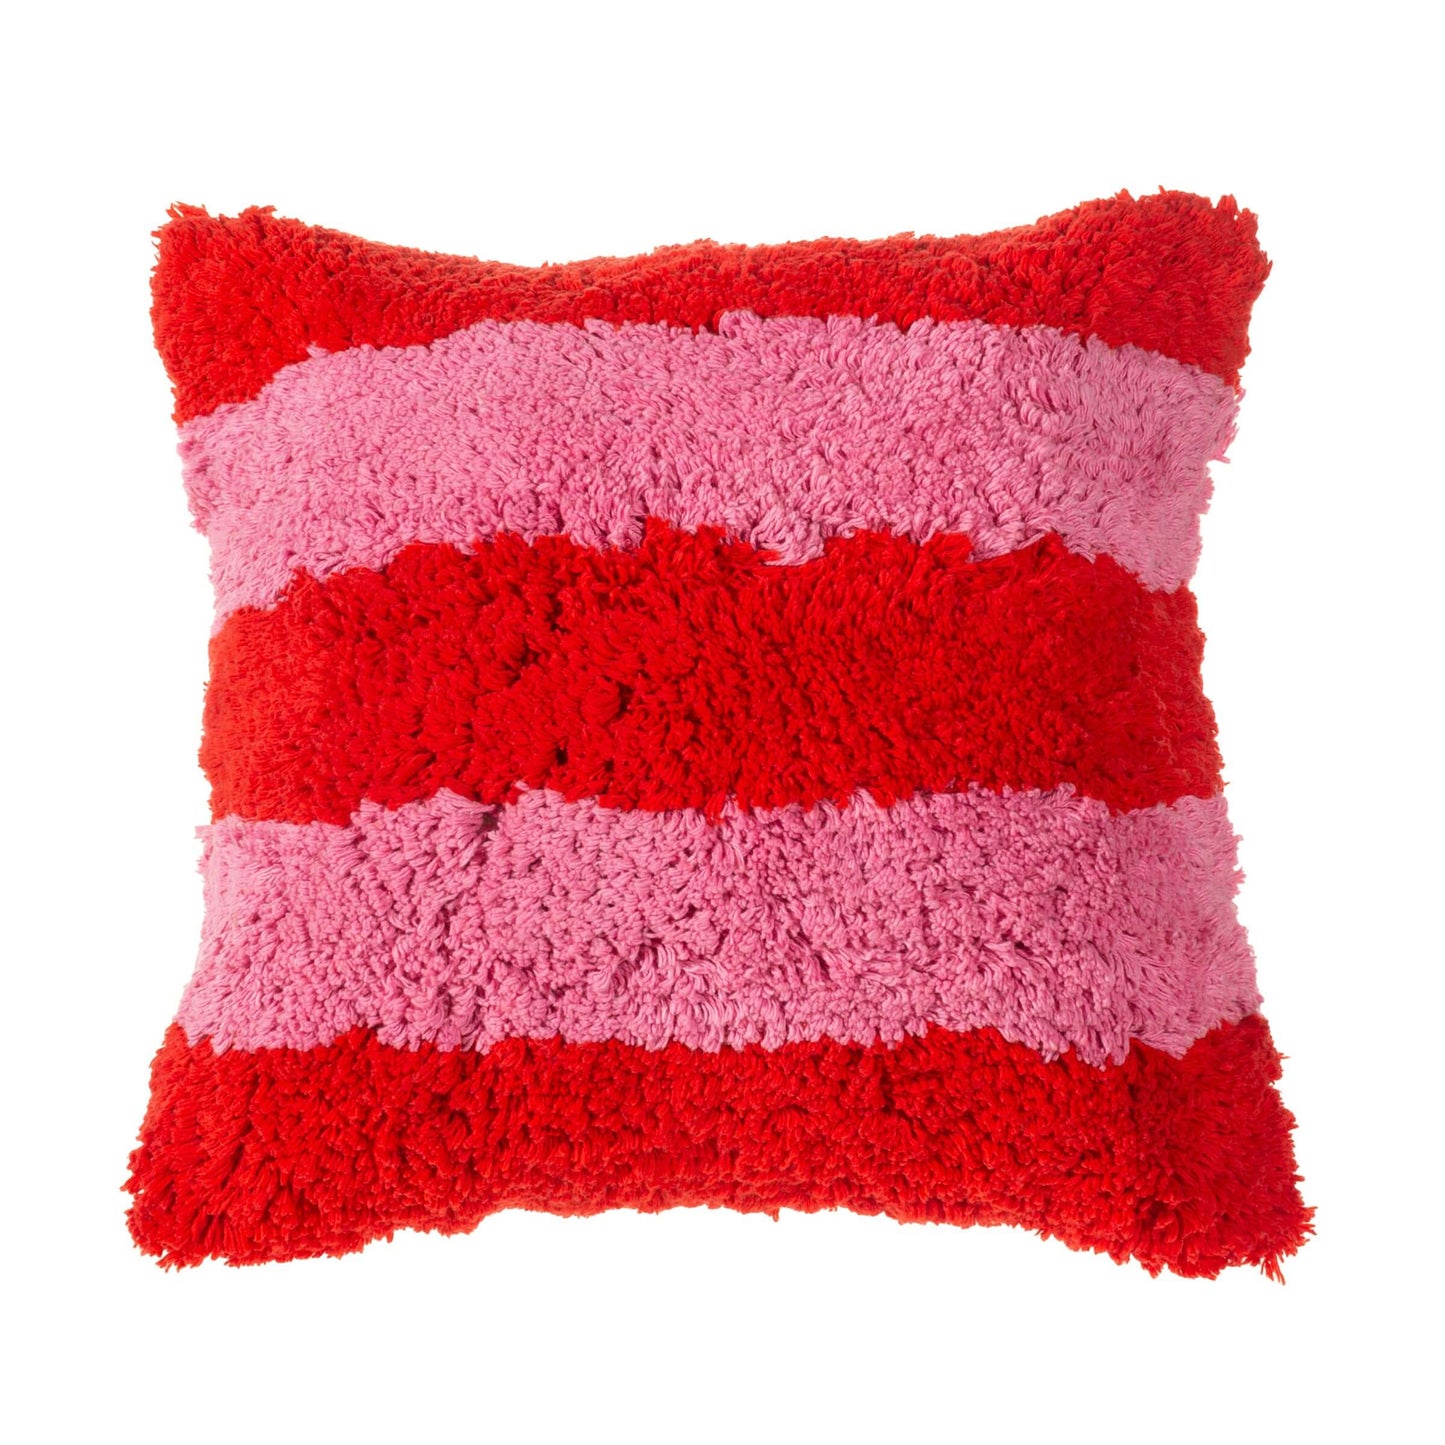 Tufted Stripe Cushion: Pink and Red